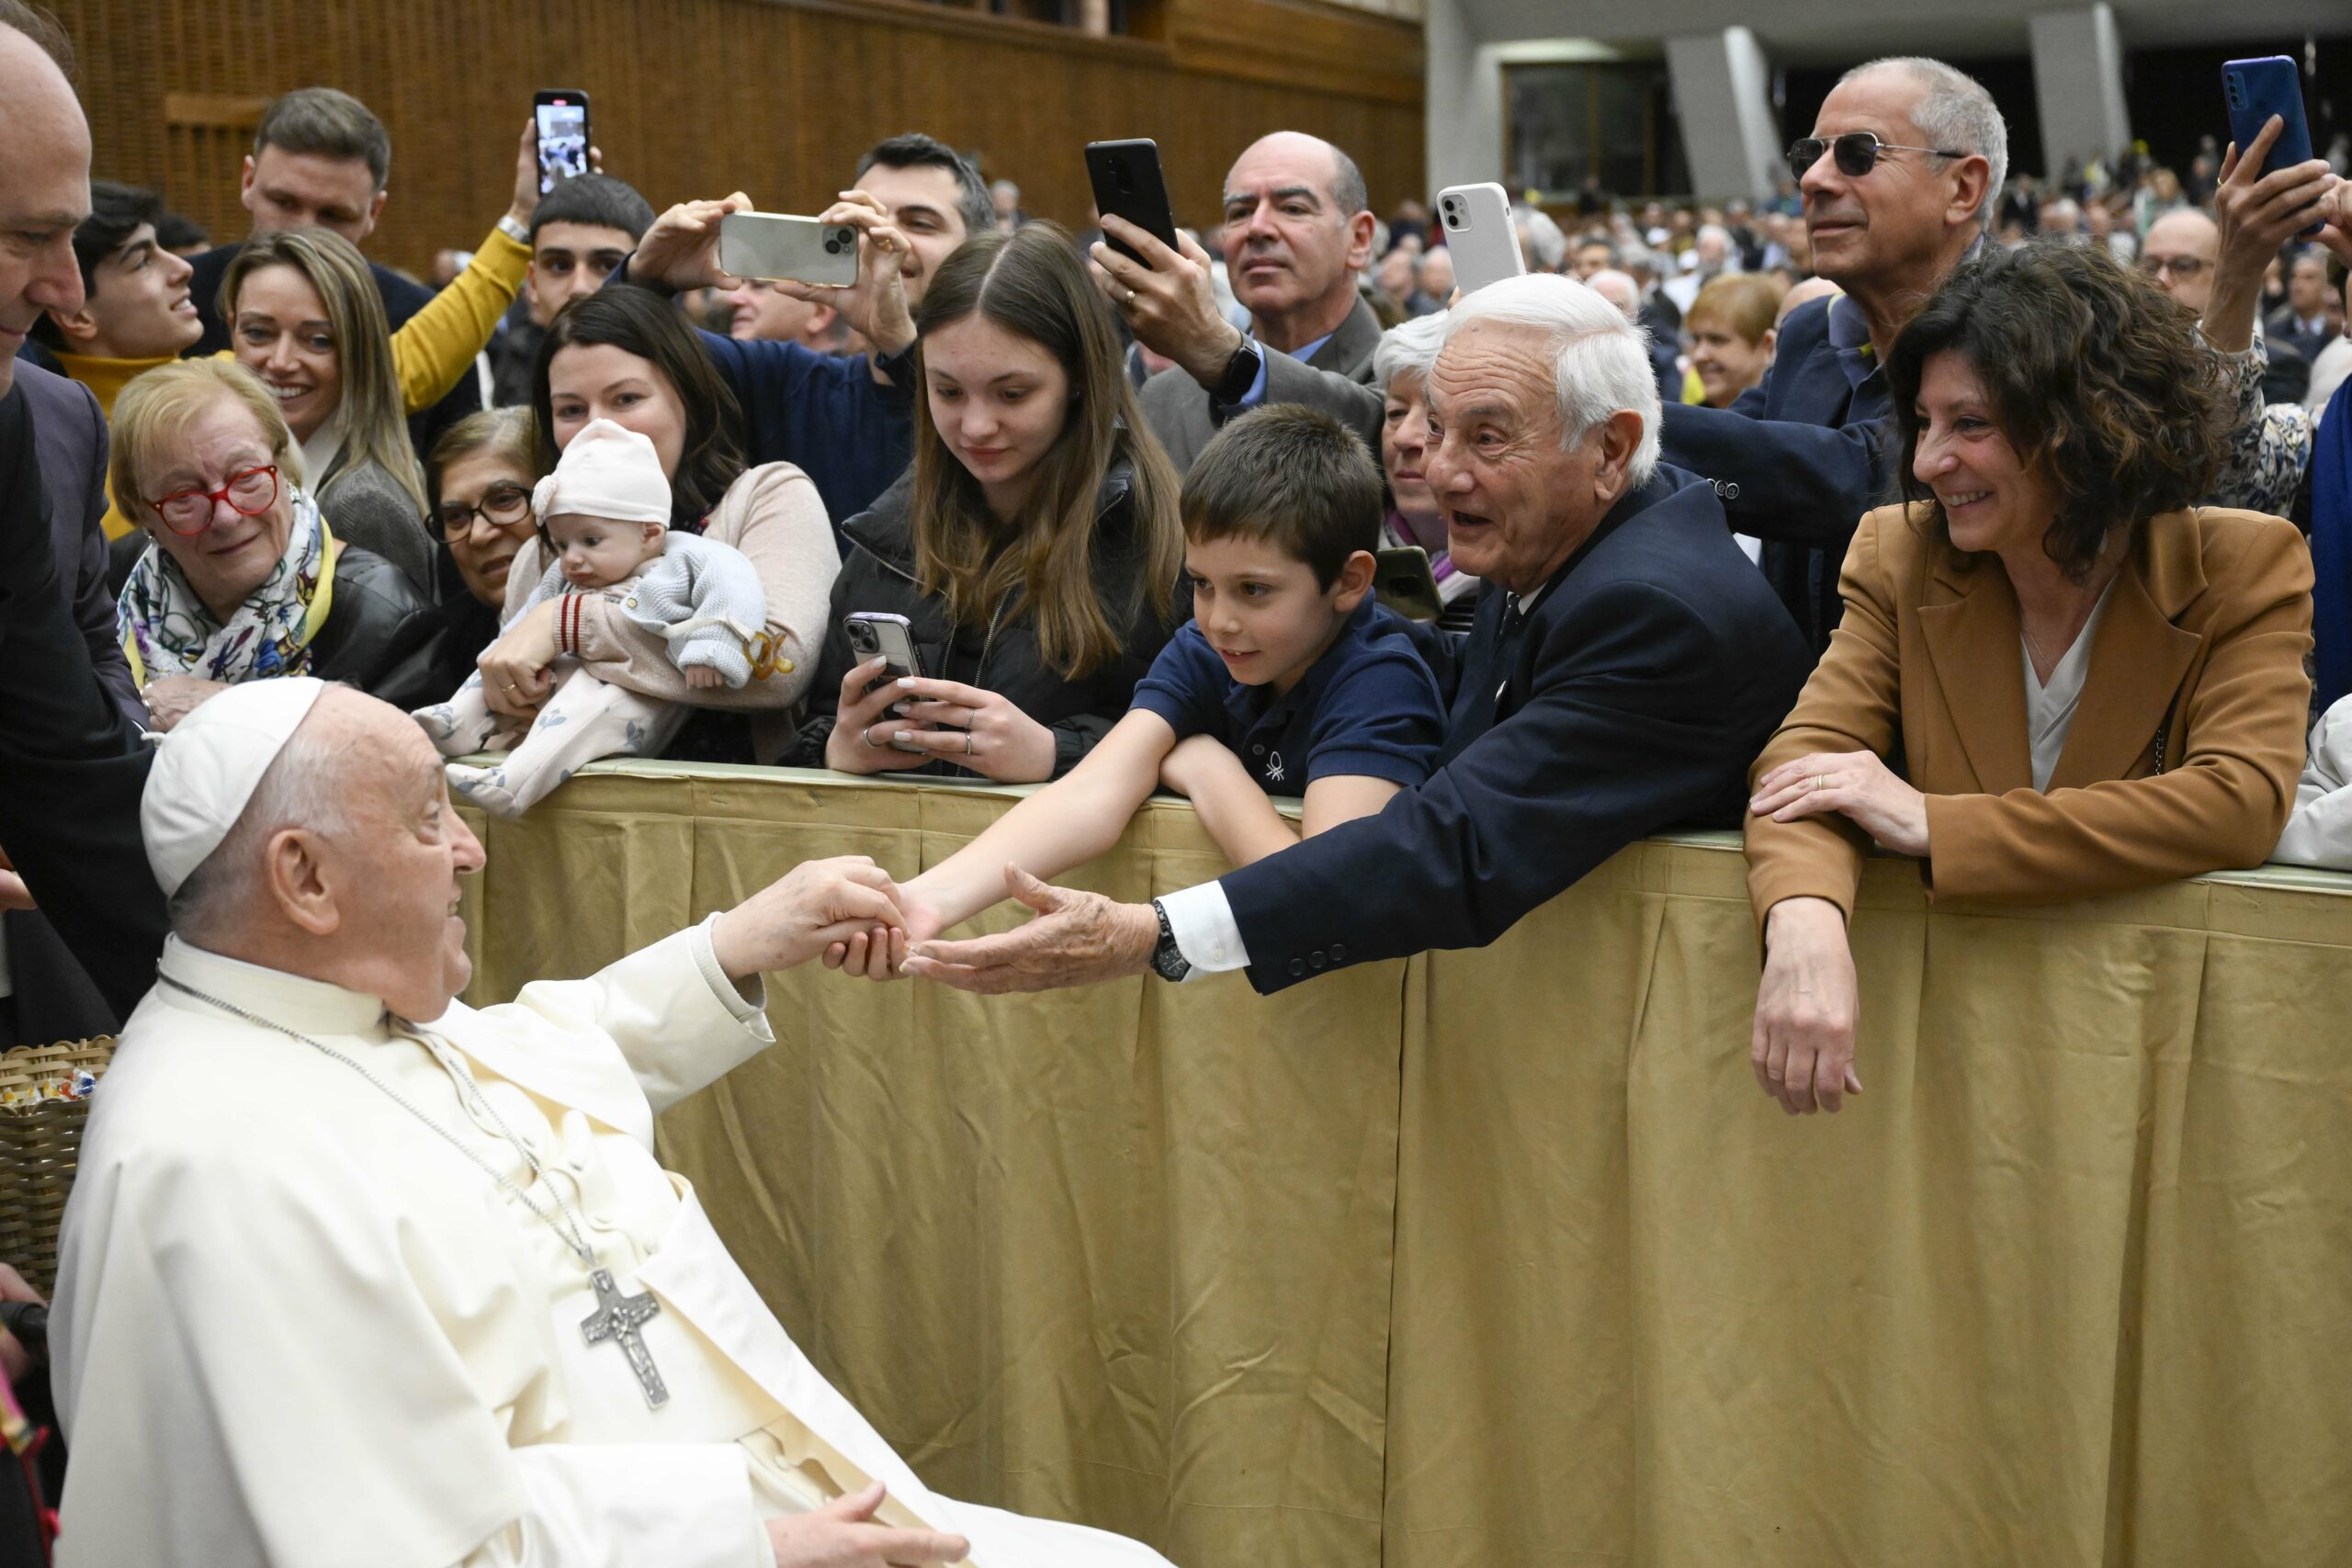 Love makes individuals and the world better, pope says